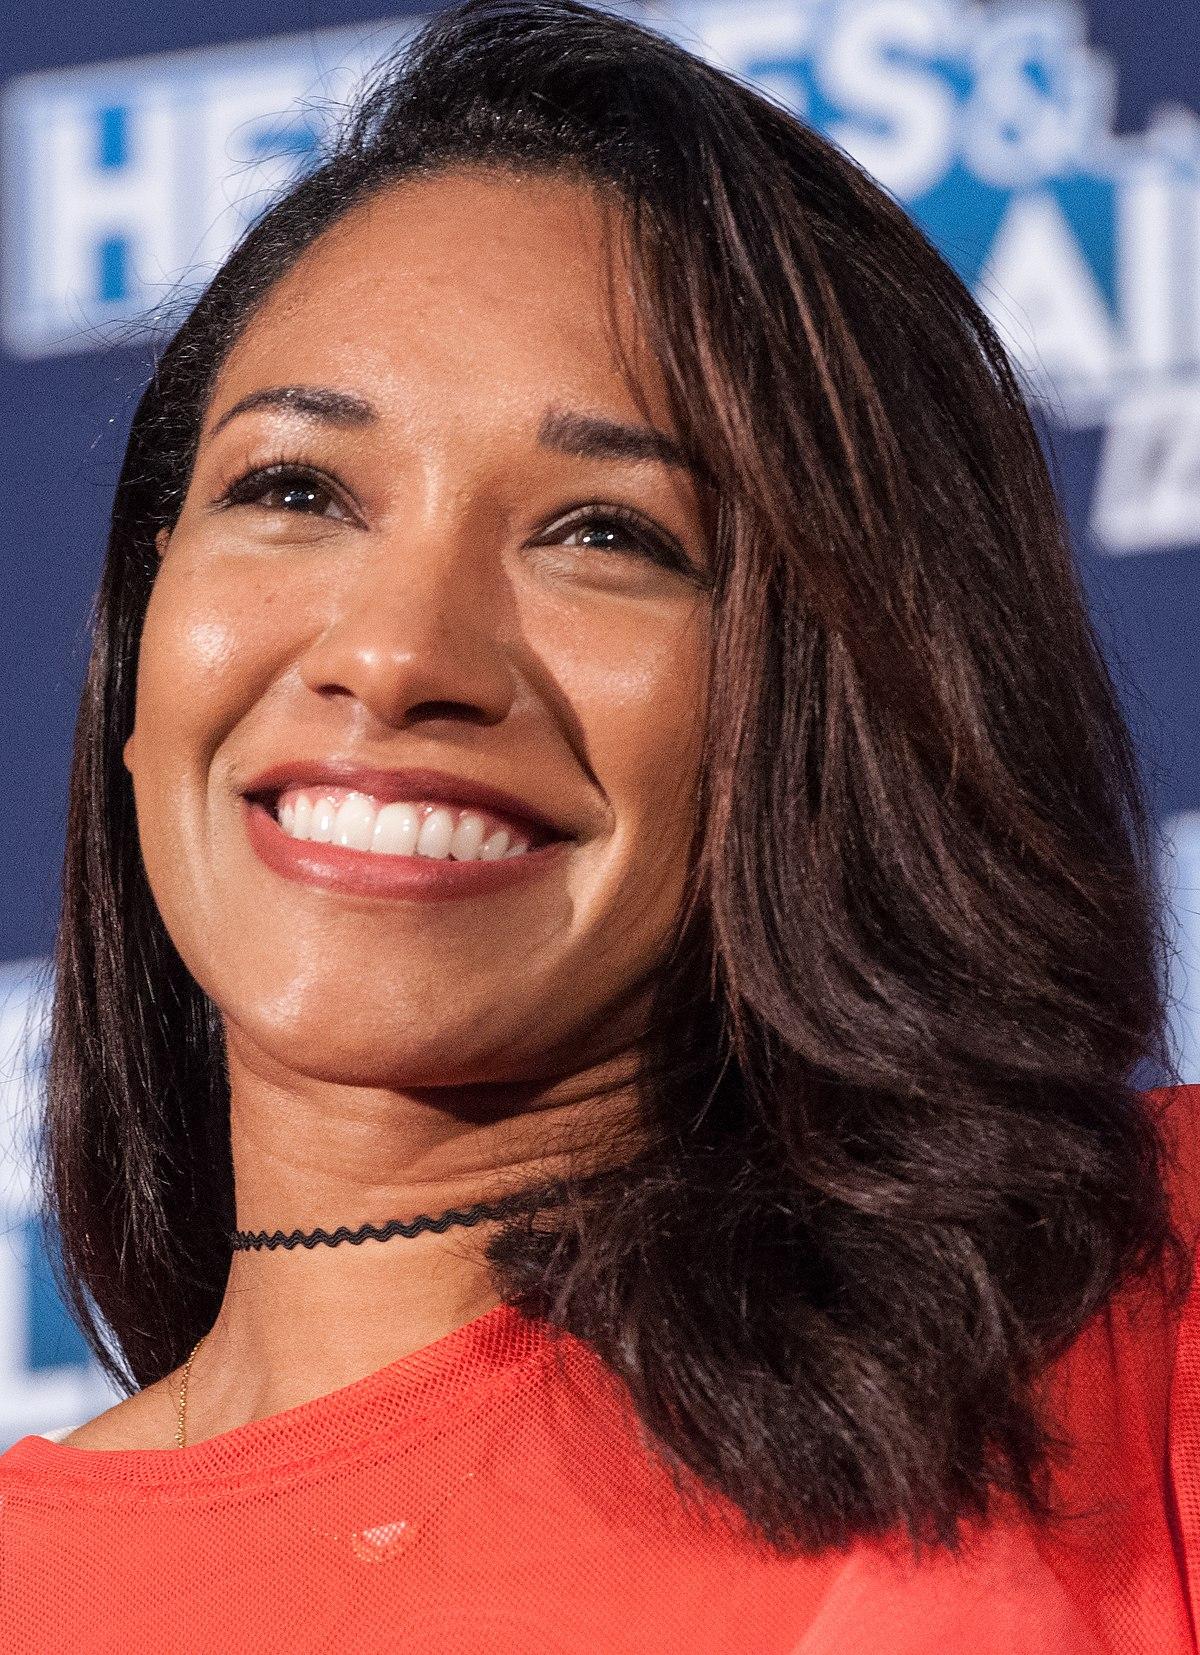 70+ Hot Pictures Of Candice Patton Who Plays Iris West In Flash TV Series 214